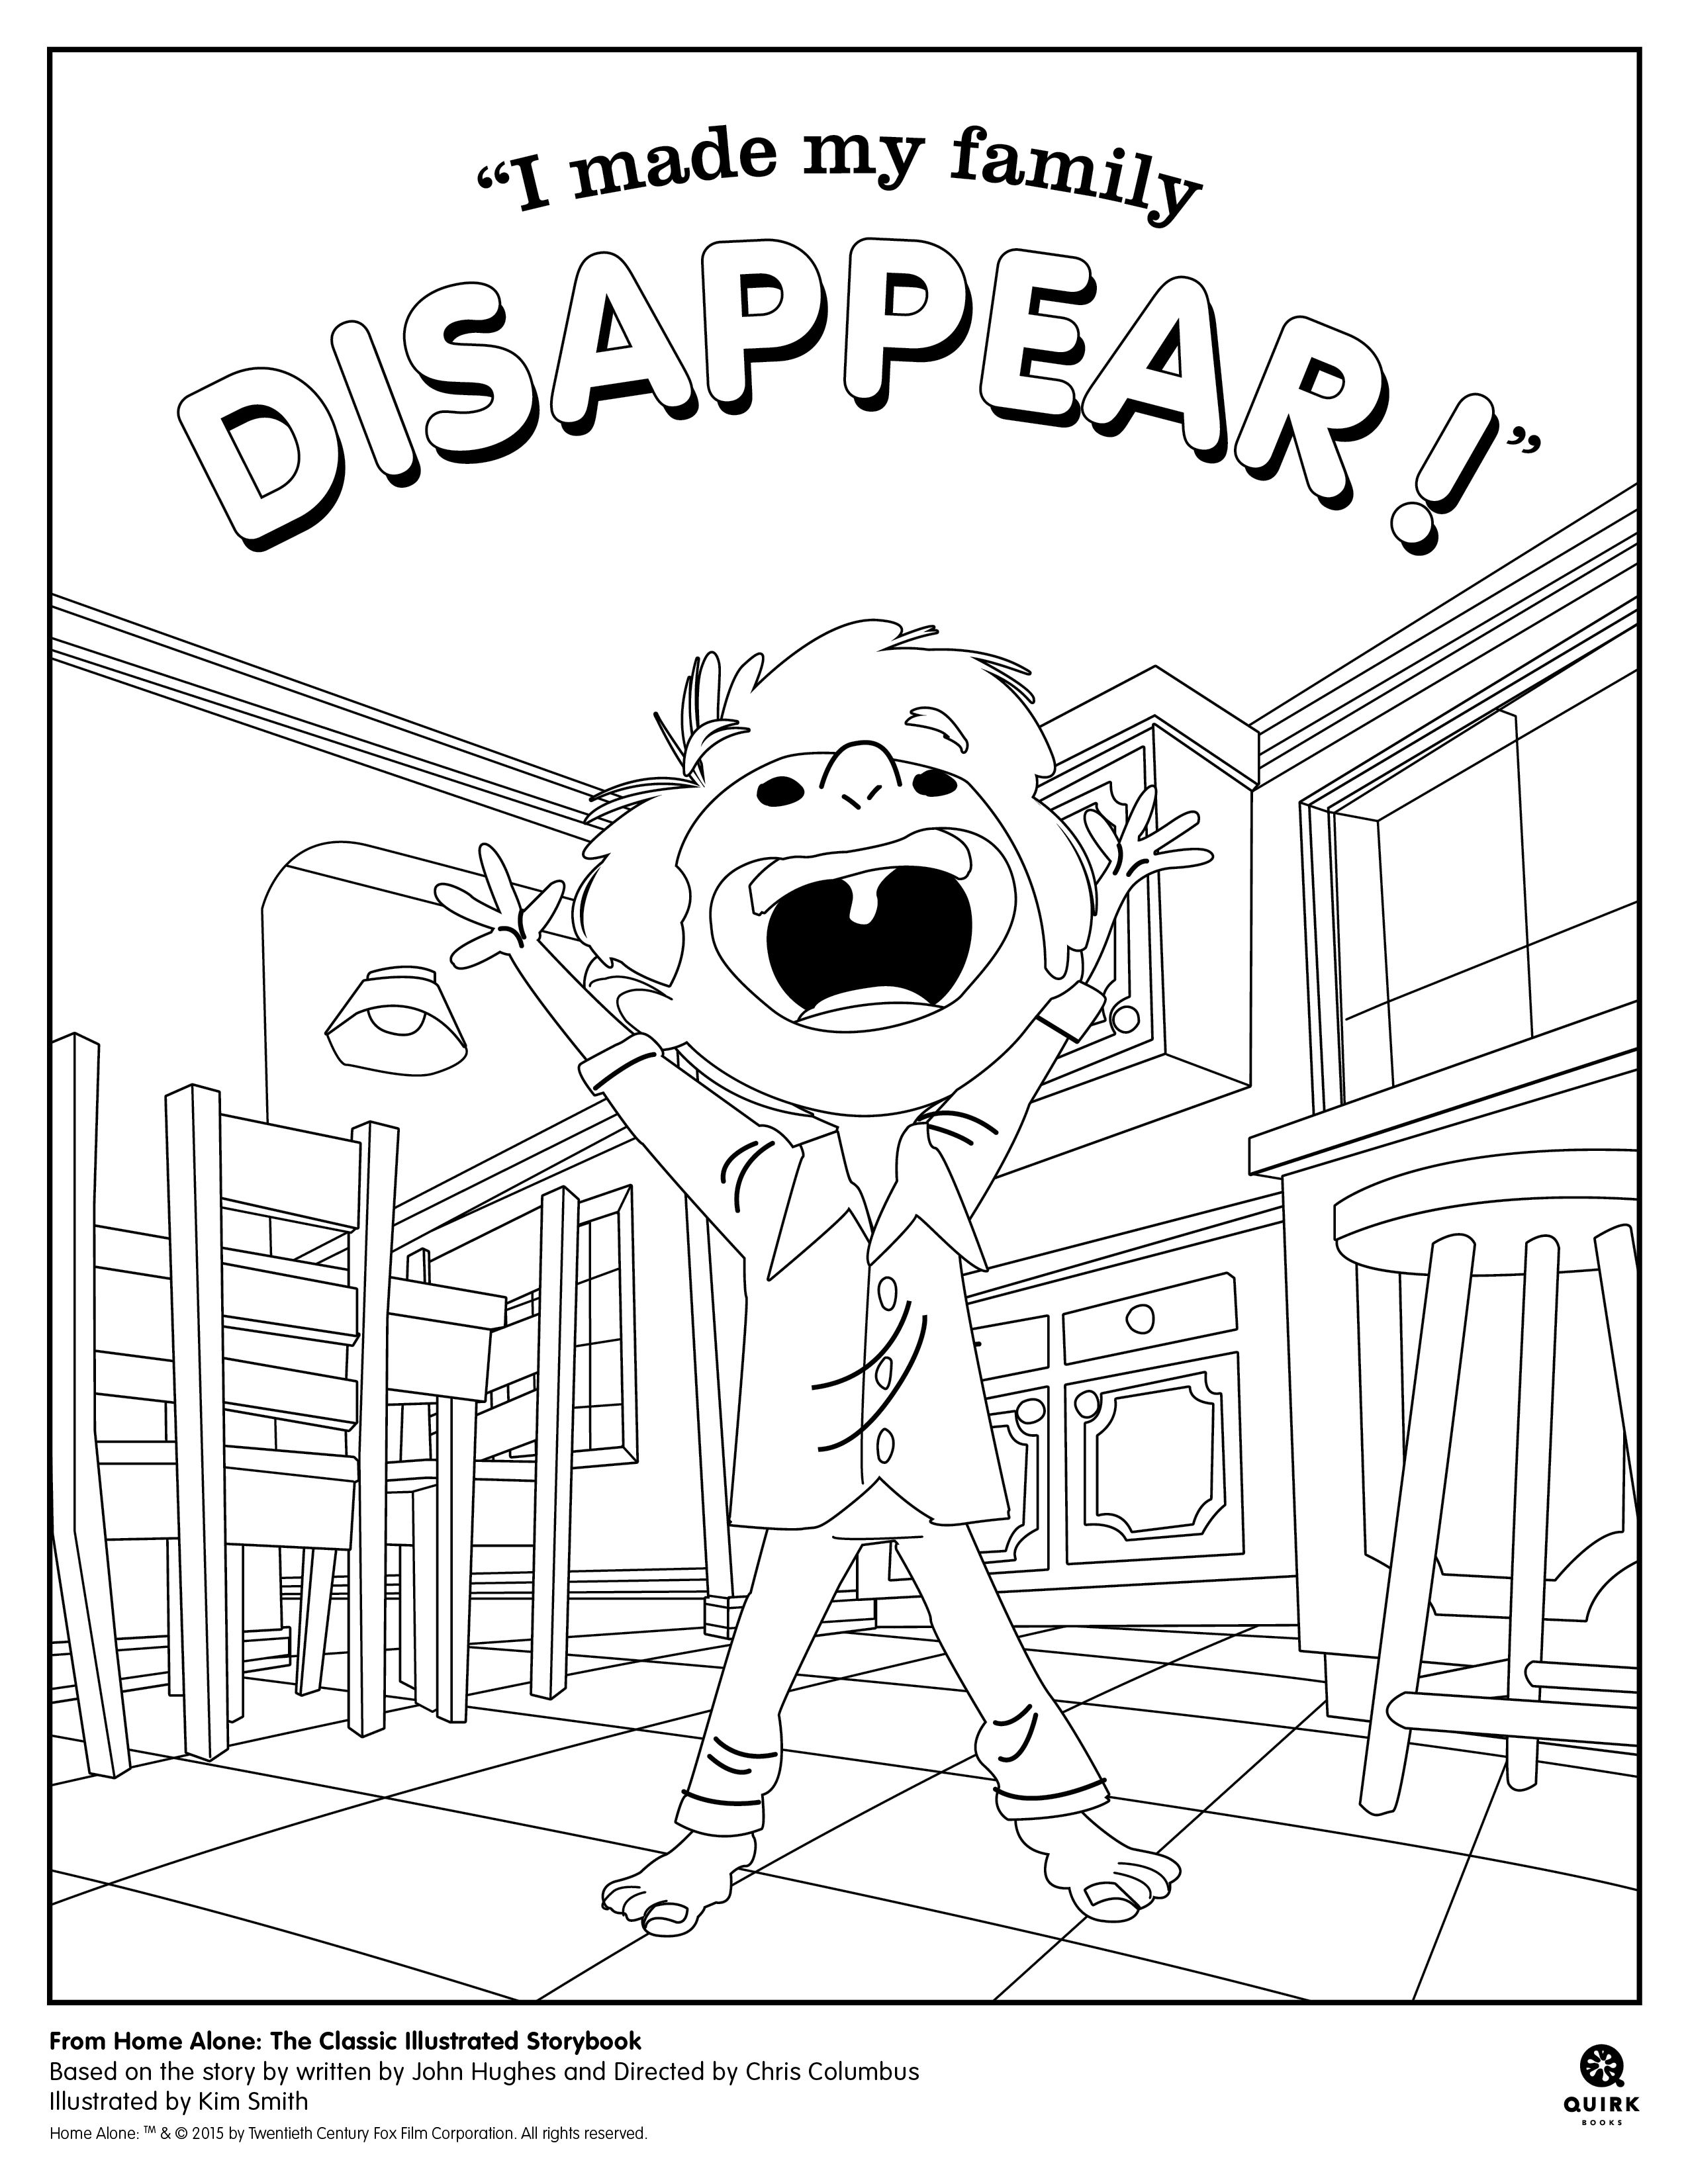 Coloring page from quirk books home alone picturebook holidays education home alone home alone movie coloring pages